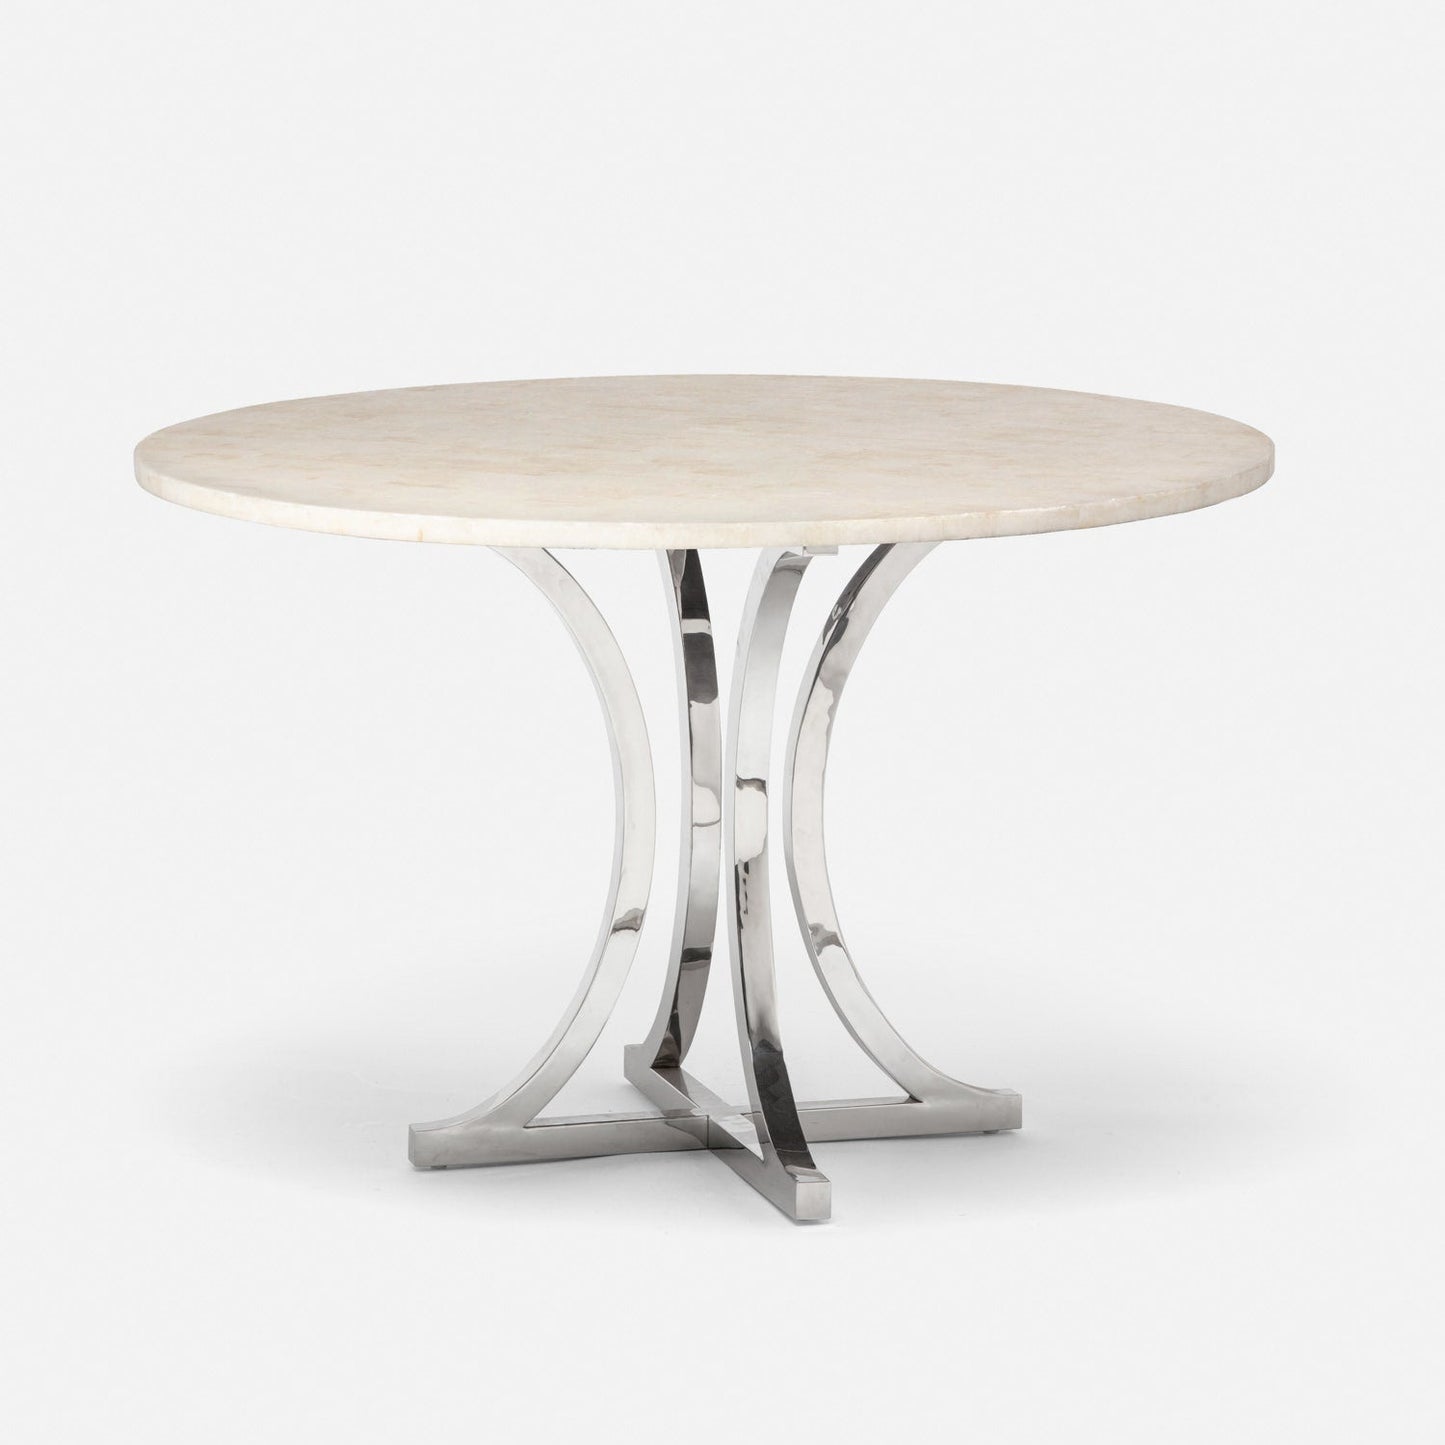 Made Goods Leighton 60" x 30" Polished Silver Steel Dinning Table With Round Ice Crystal Stone Table Top